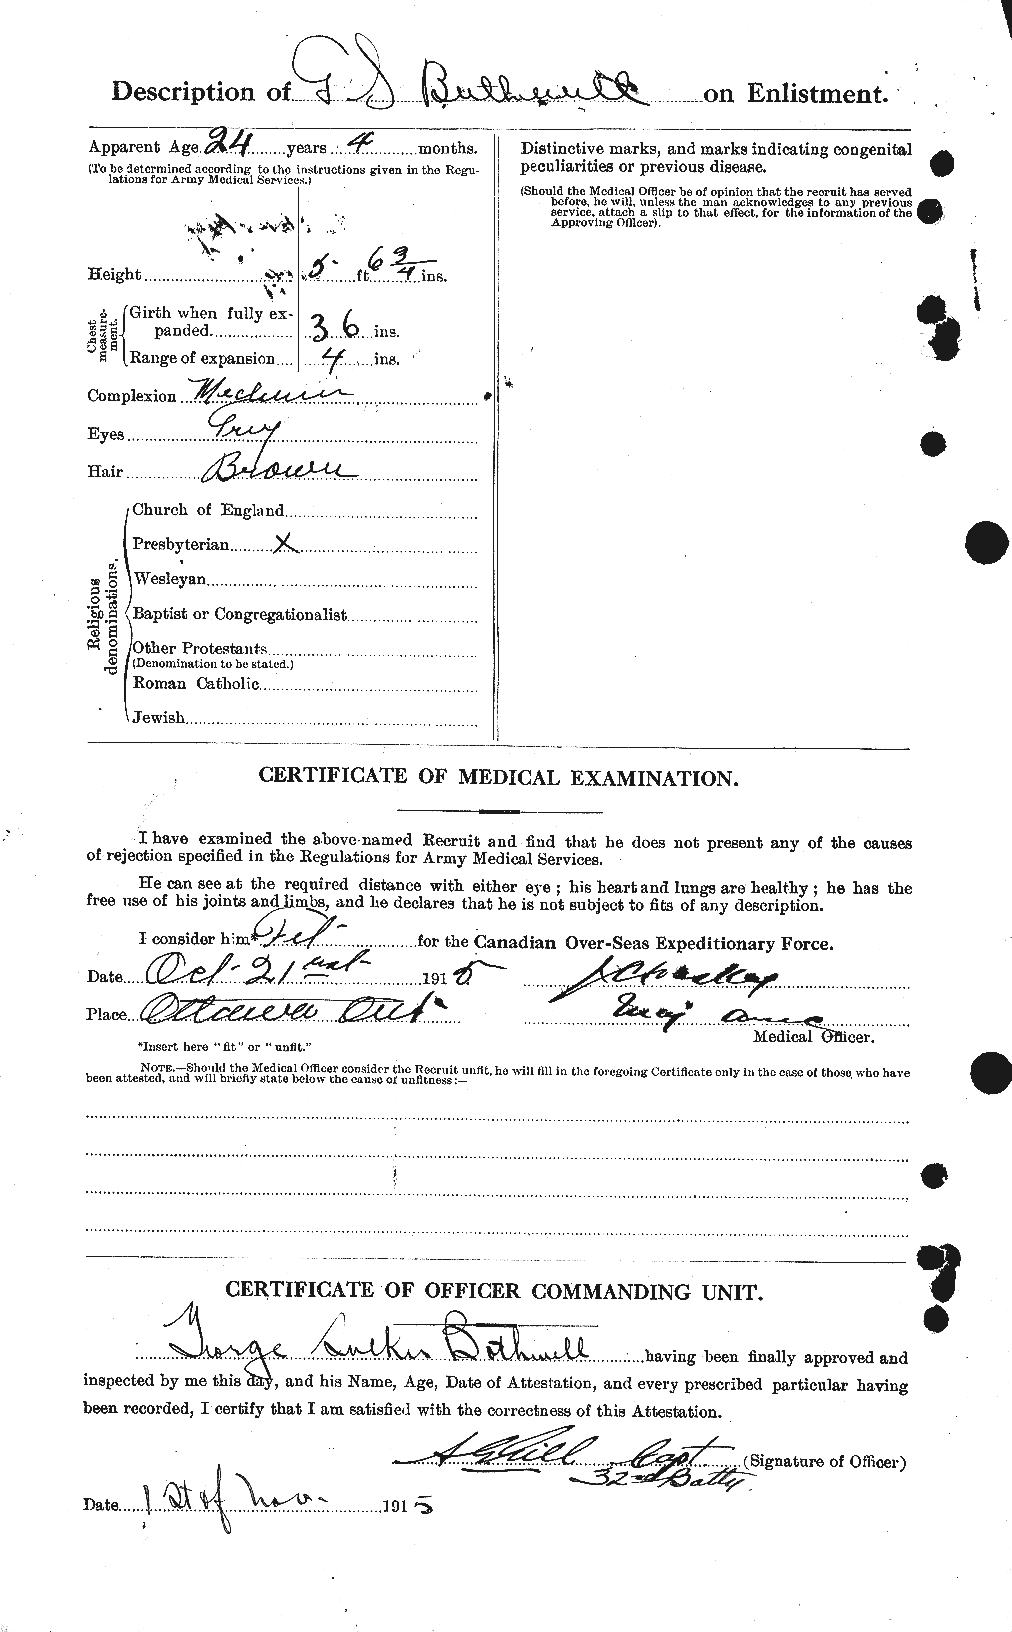 Personnel Records of the First World War - CEF 252002b